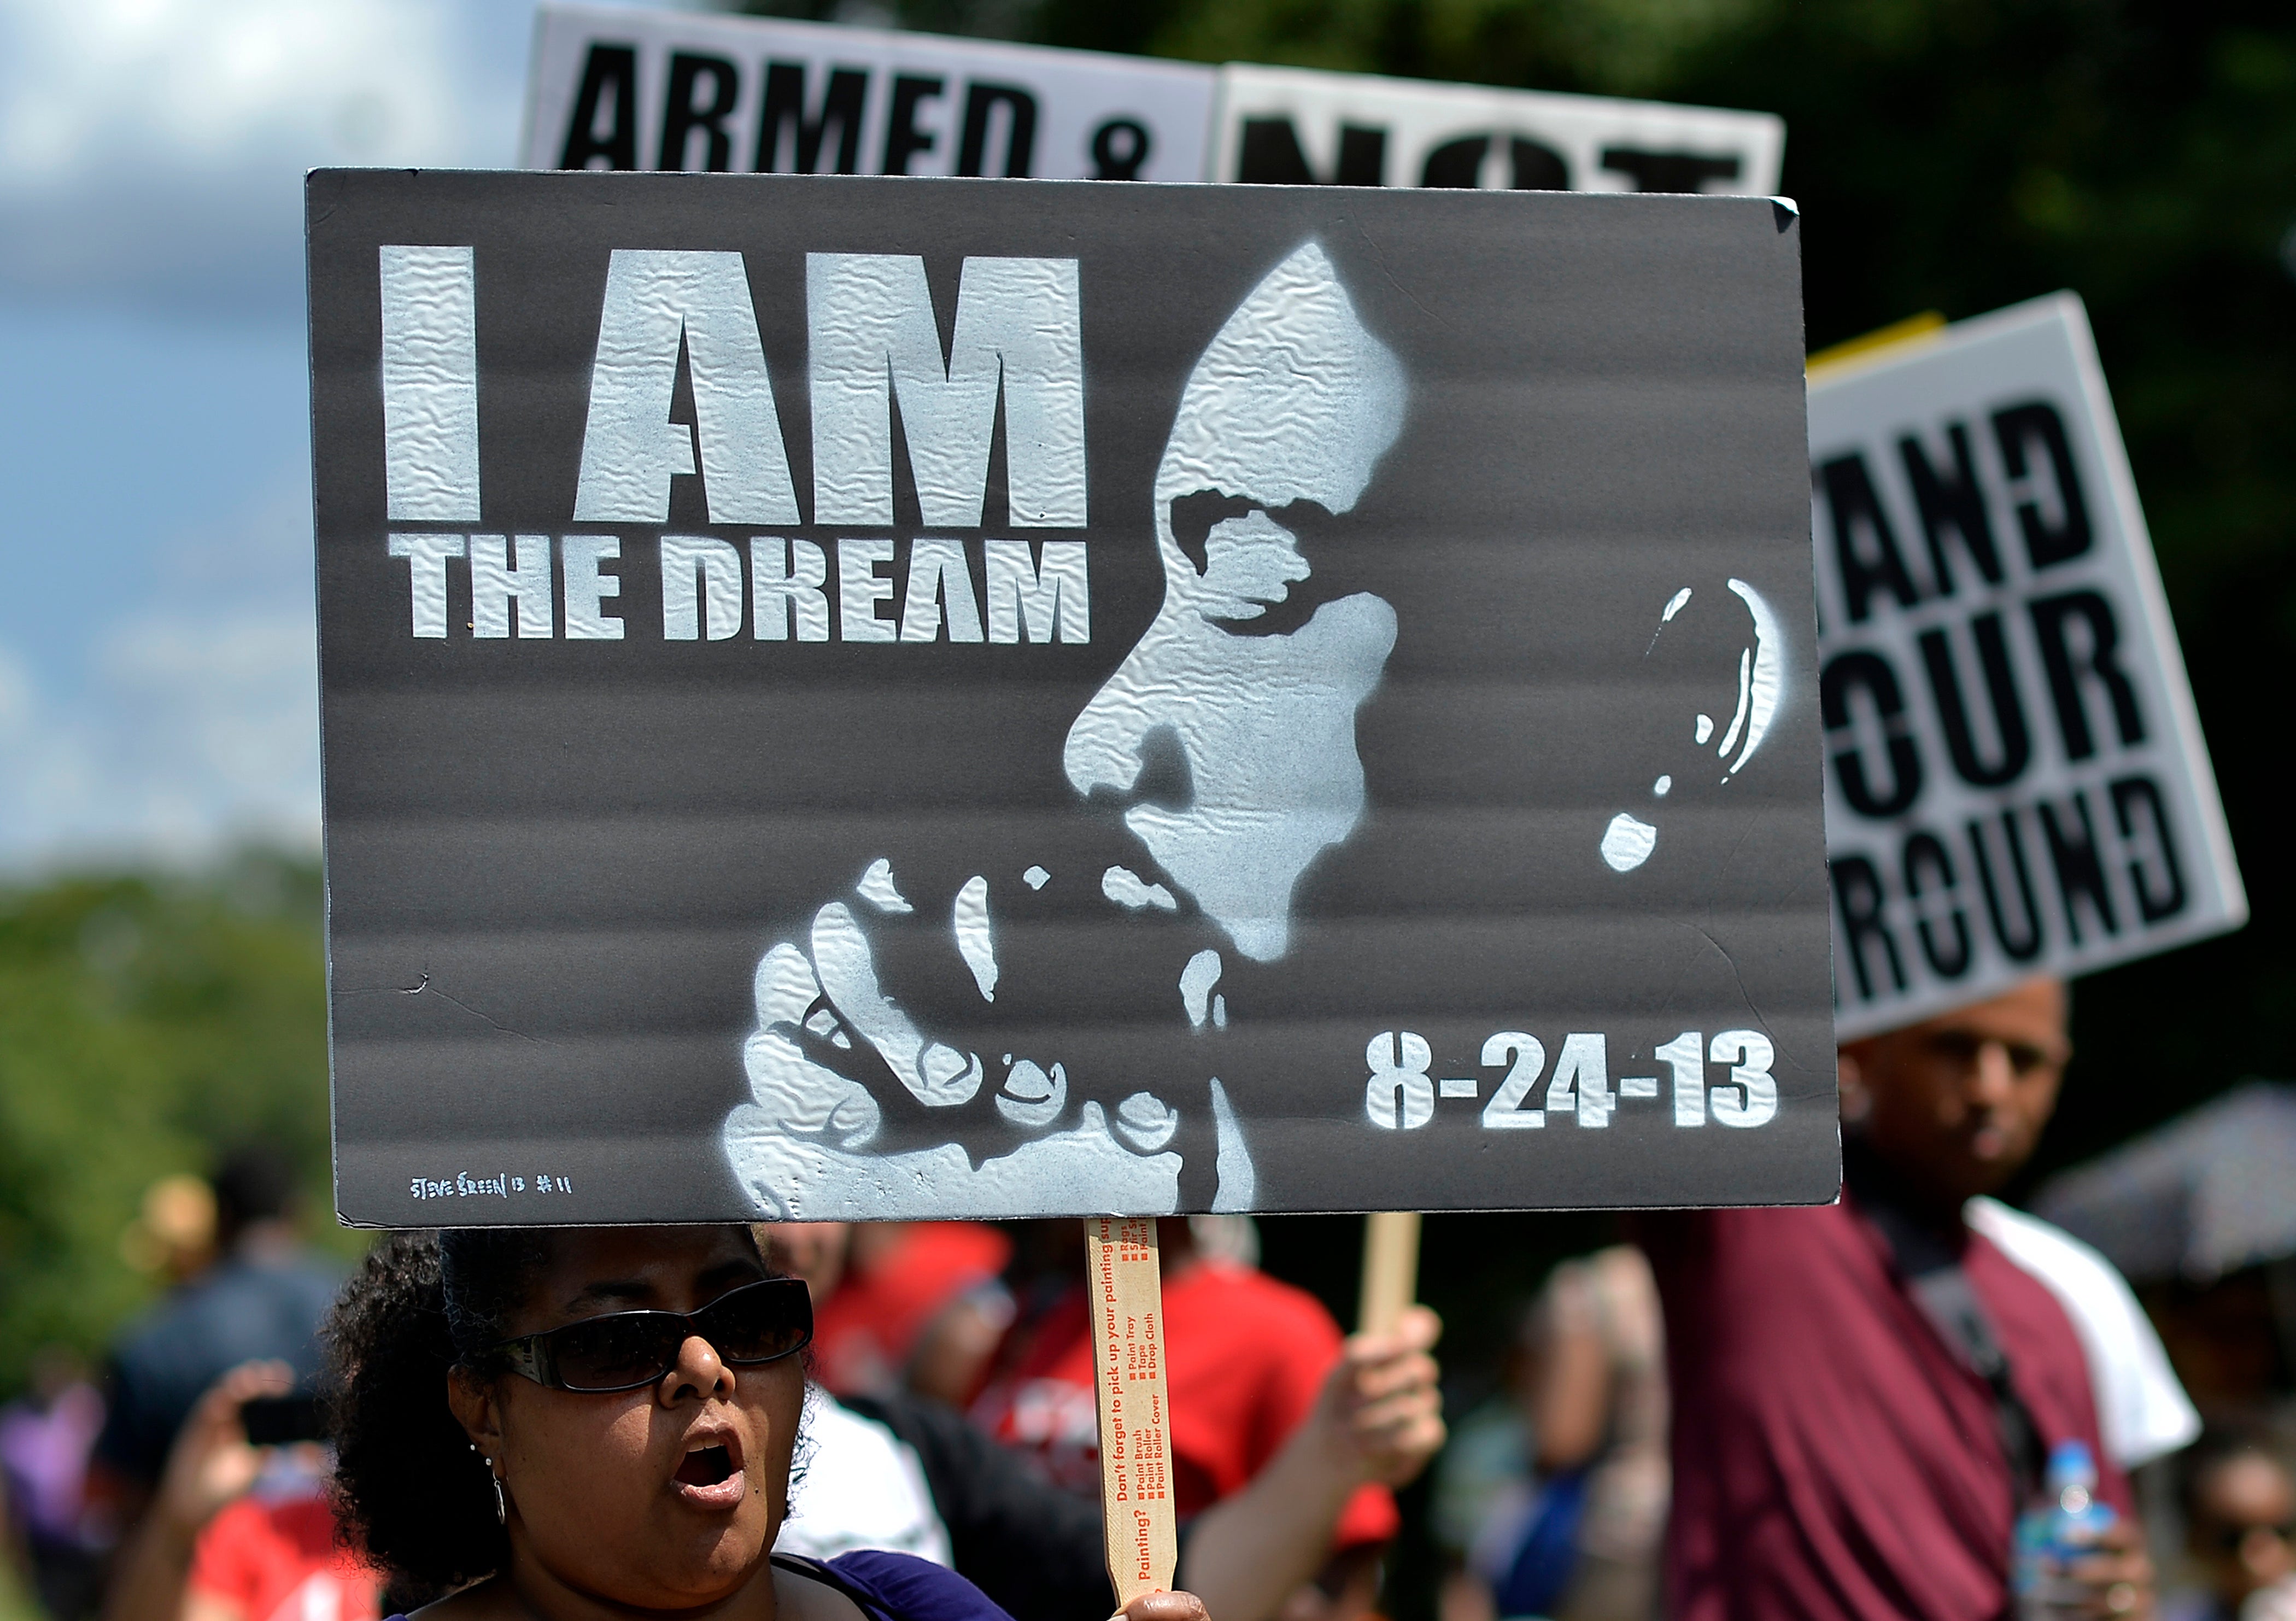 PHOTOS: 50th Anniversary of the March on Washington